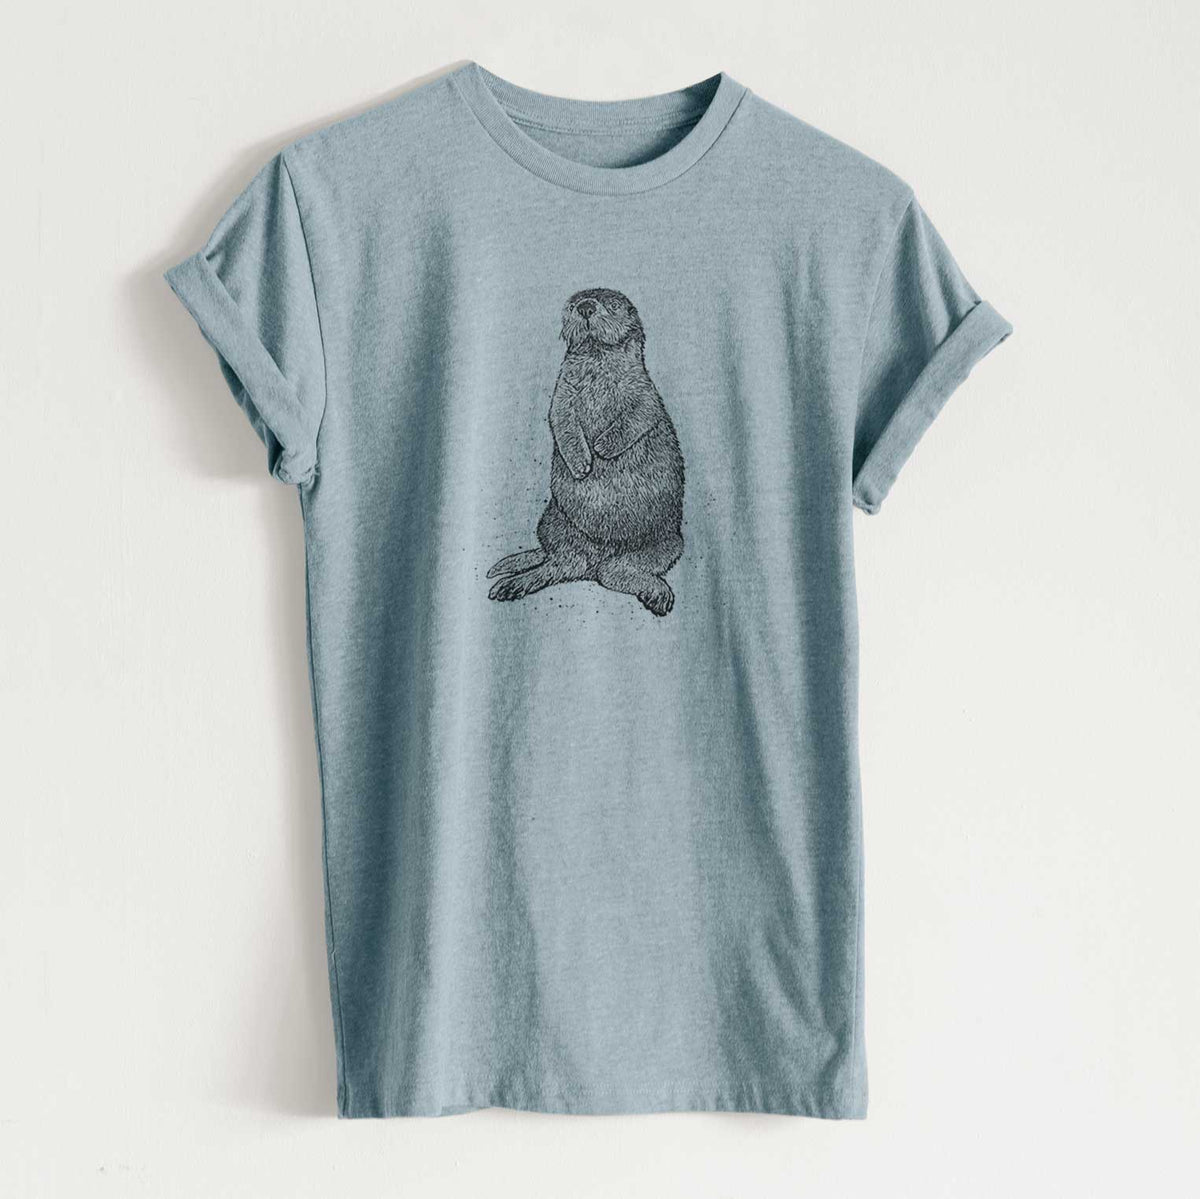 Enhydra lutris - California Sea Otter - Unisex Recycled Eco Tee  - CLOSEOUT - FINAL SALE